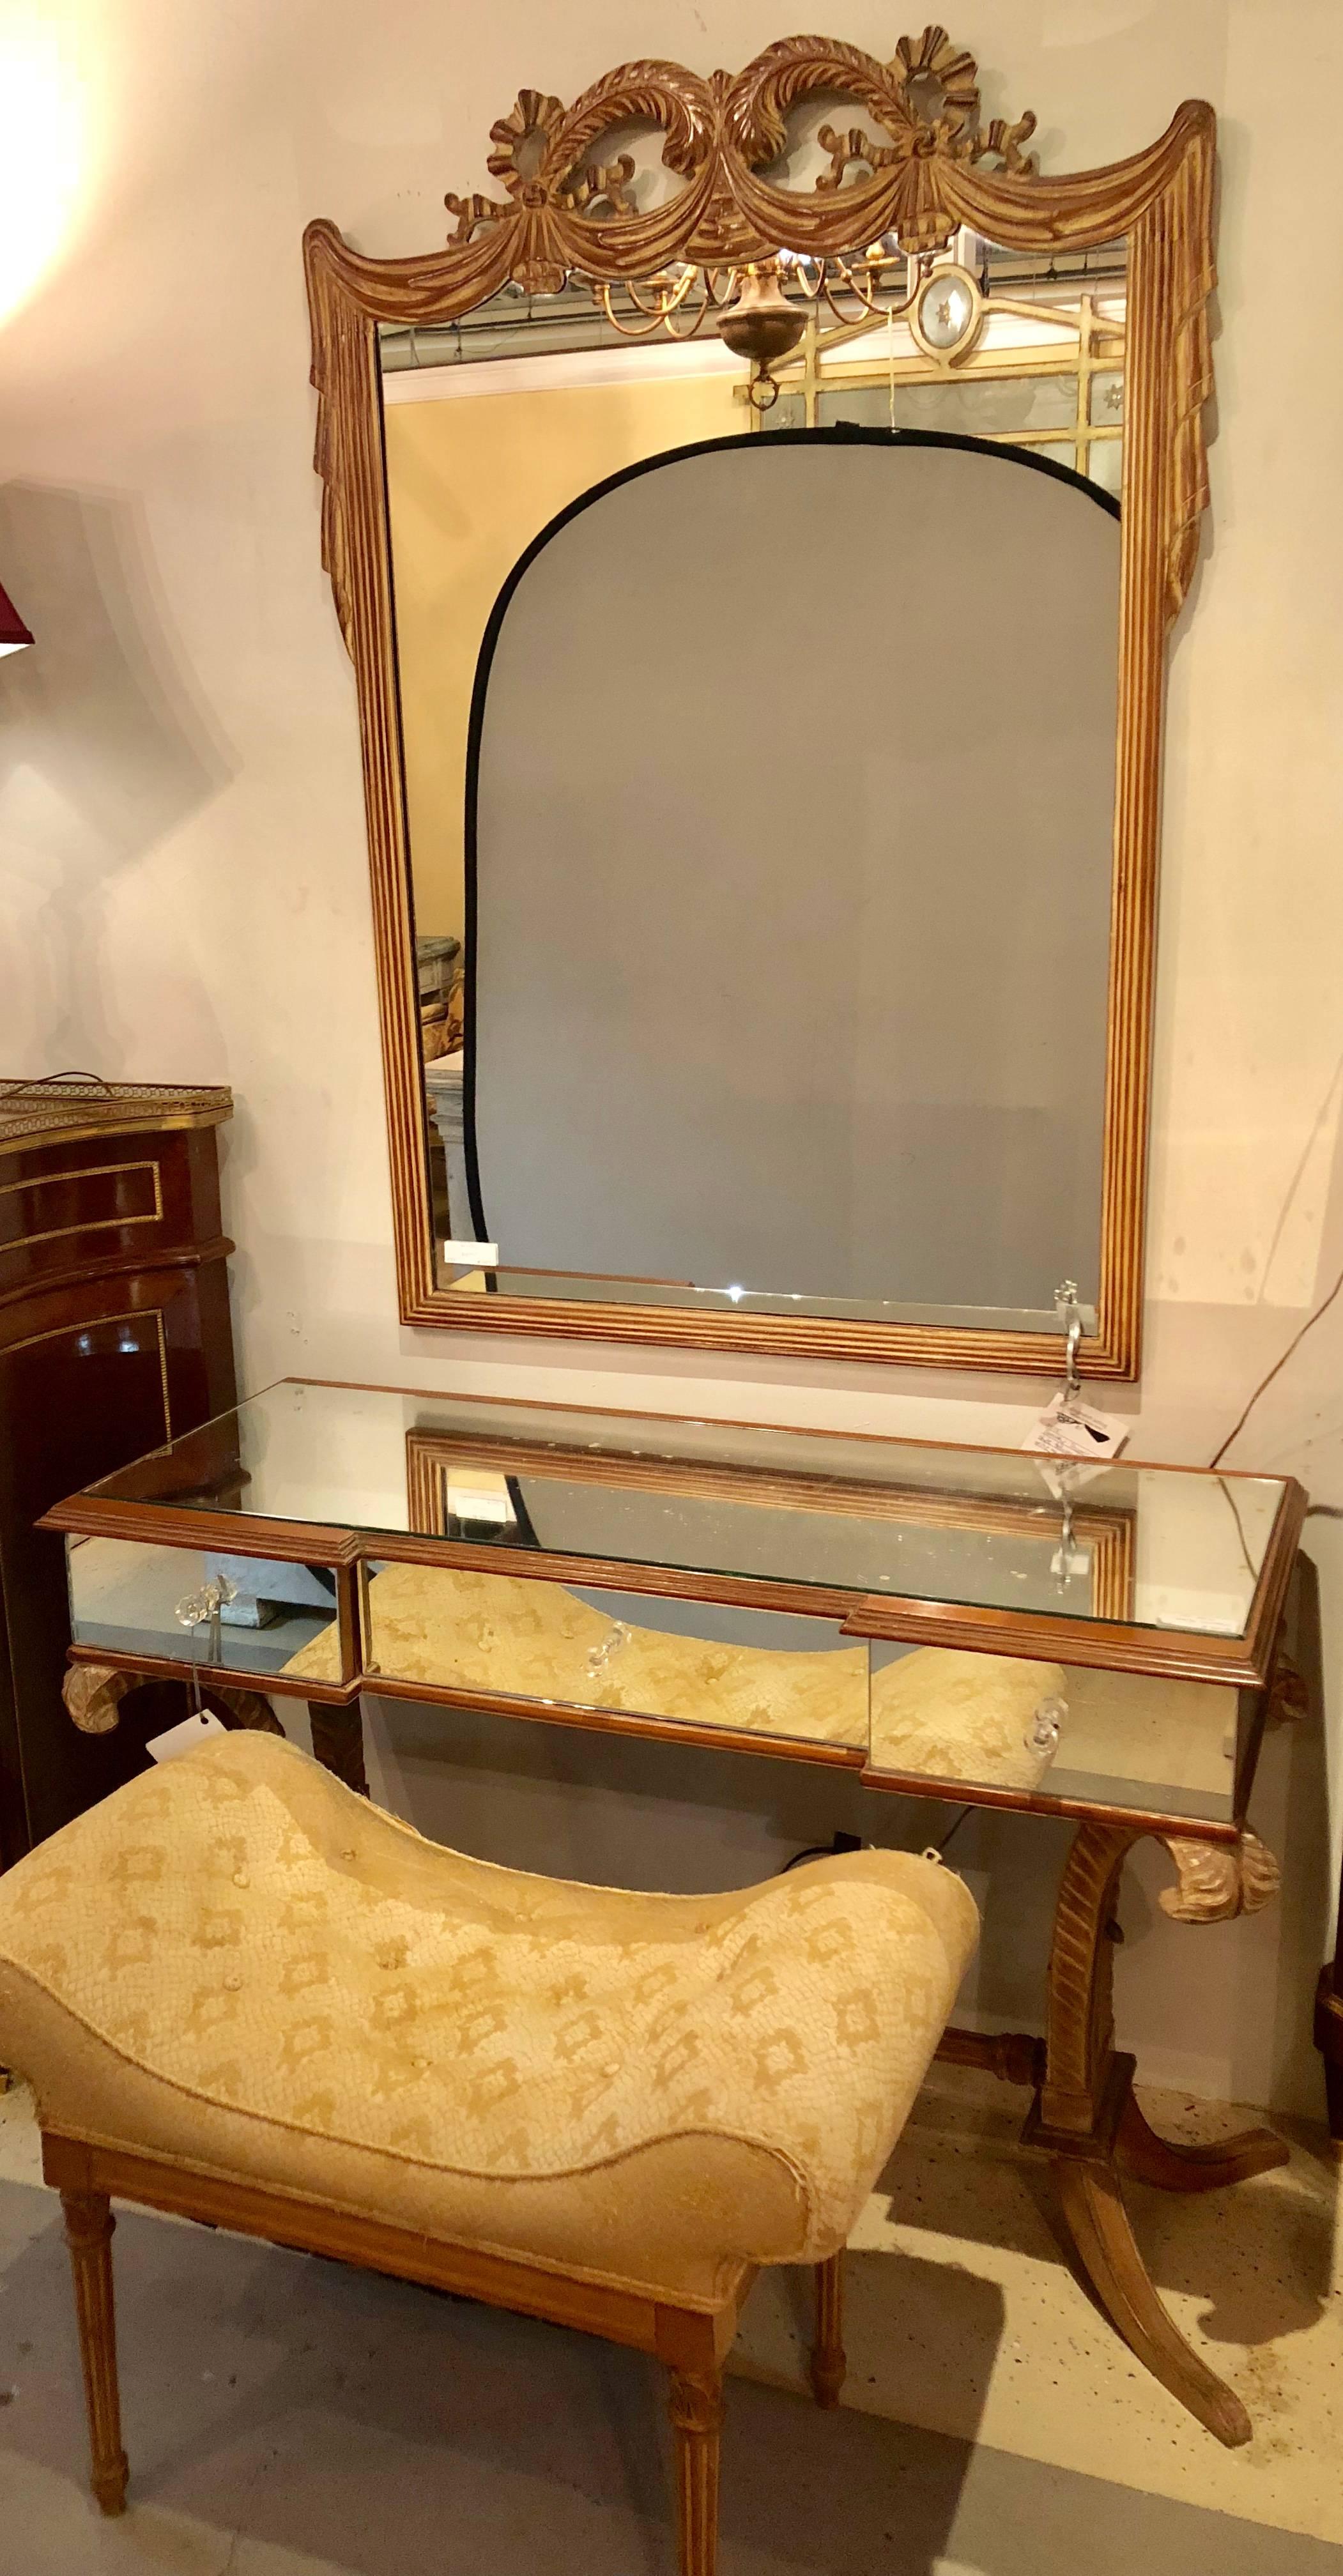 A one of a kind Fleur de Plume Plume three piece set with vanity, matching wall mirror and bench by Grosfeld House. The sprayed legs supporting a Fleur de Plume decorated top. The vanity all around mirrored on top, sides and drawers with crystal